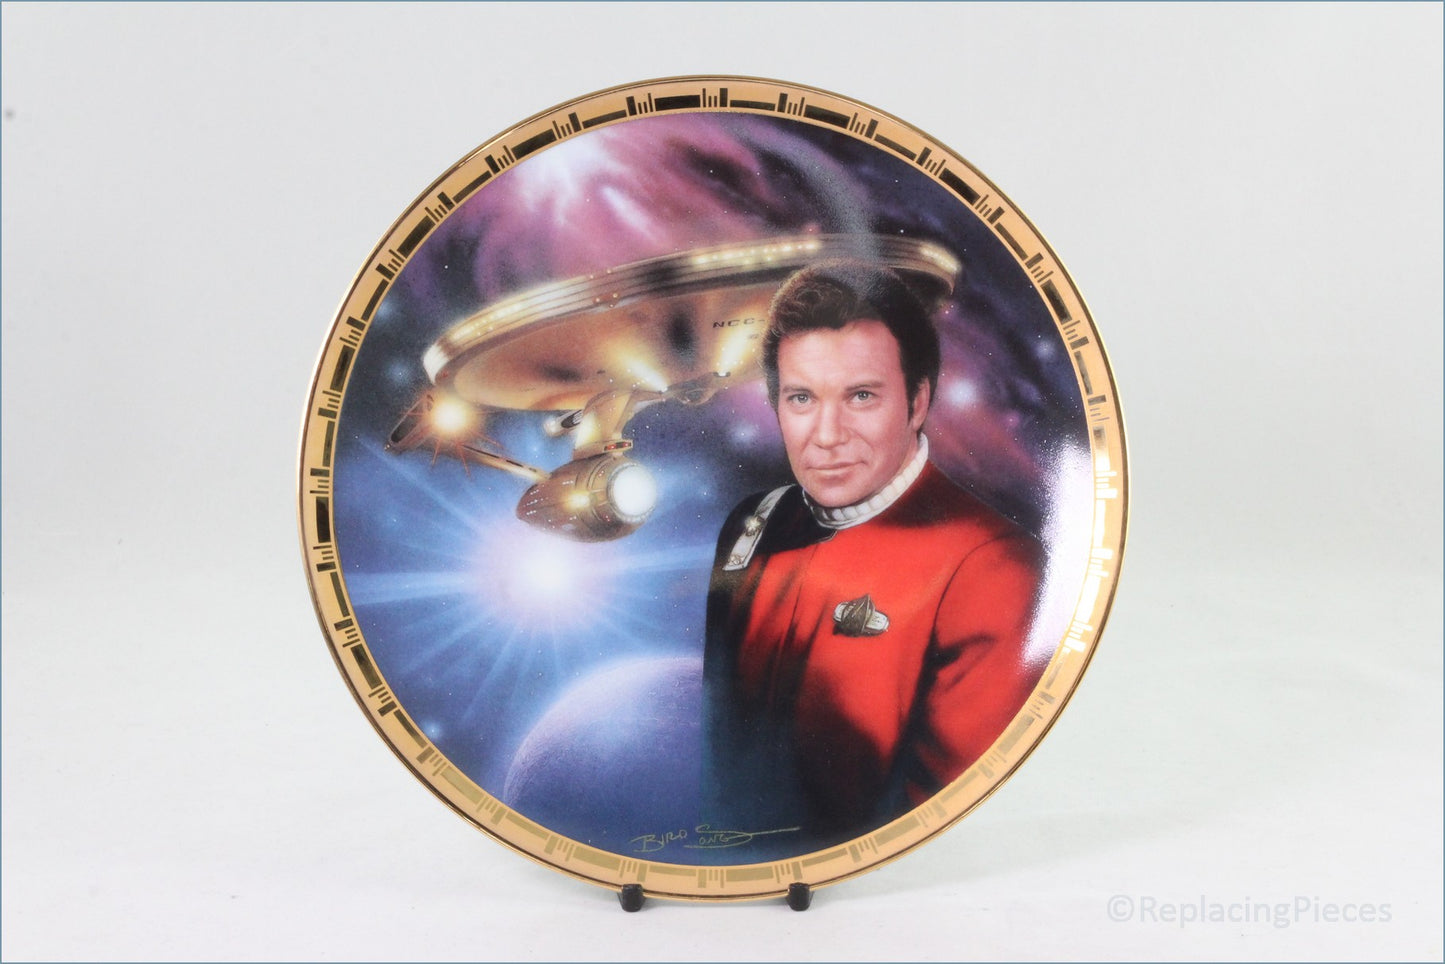 The Hamilton Collection - Star Trek 'The Next Generation' - The Power Of Command - Admiral Kirk And The USS Enterprise NCC-1701